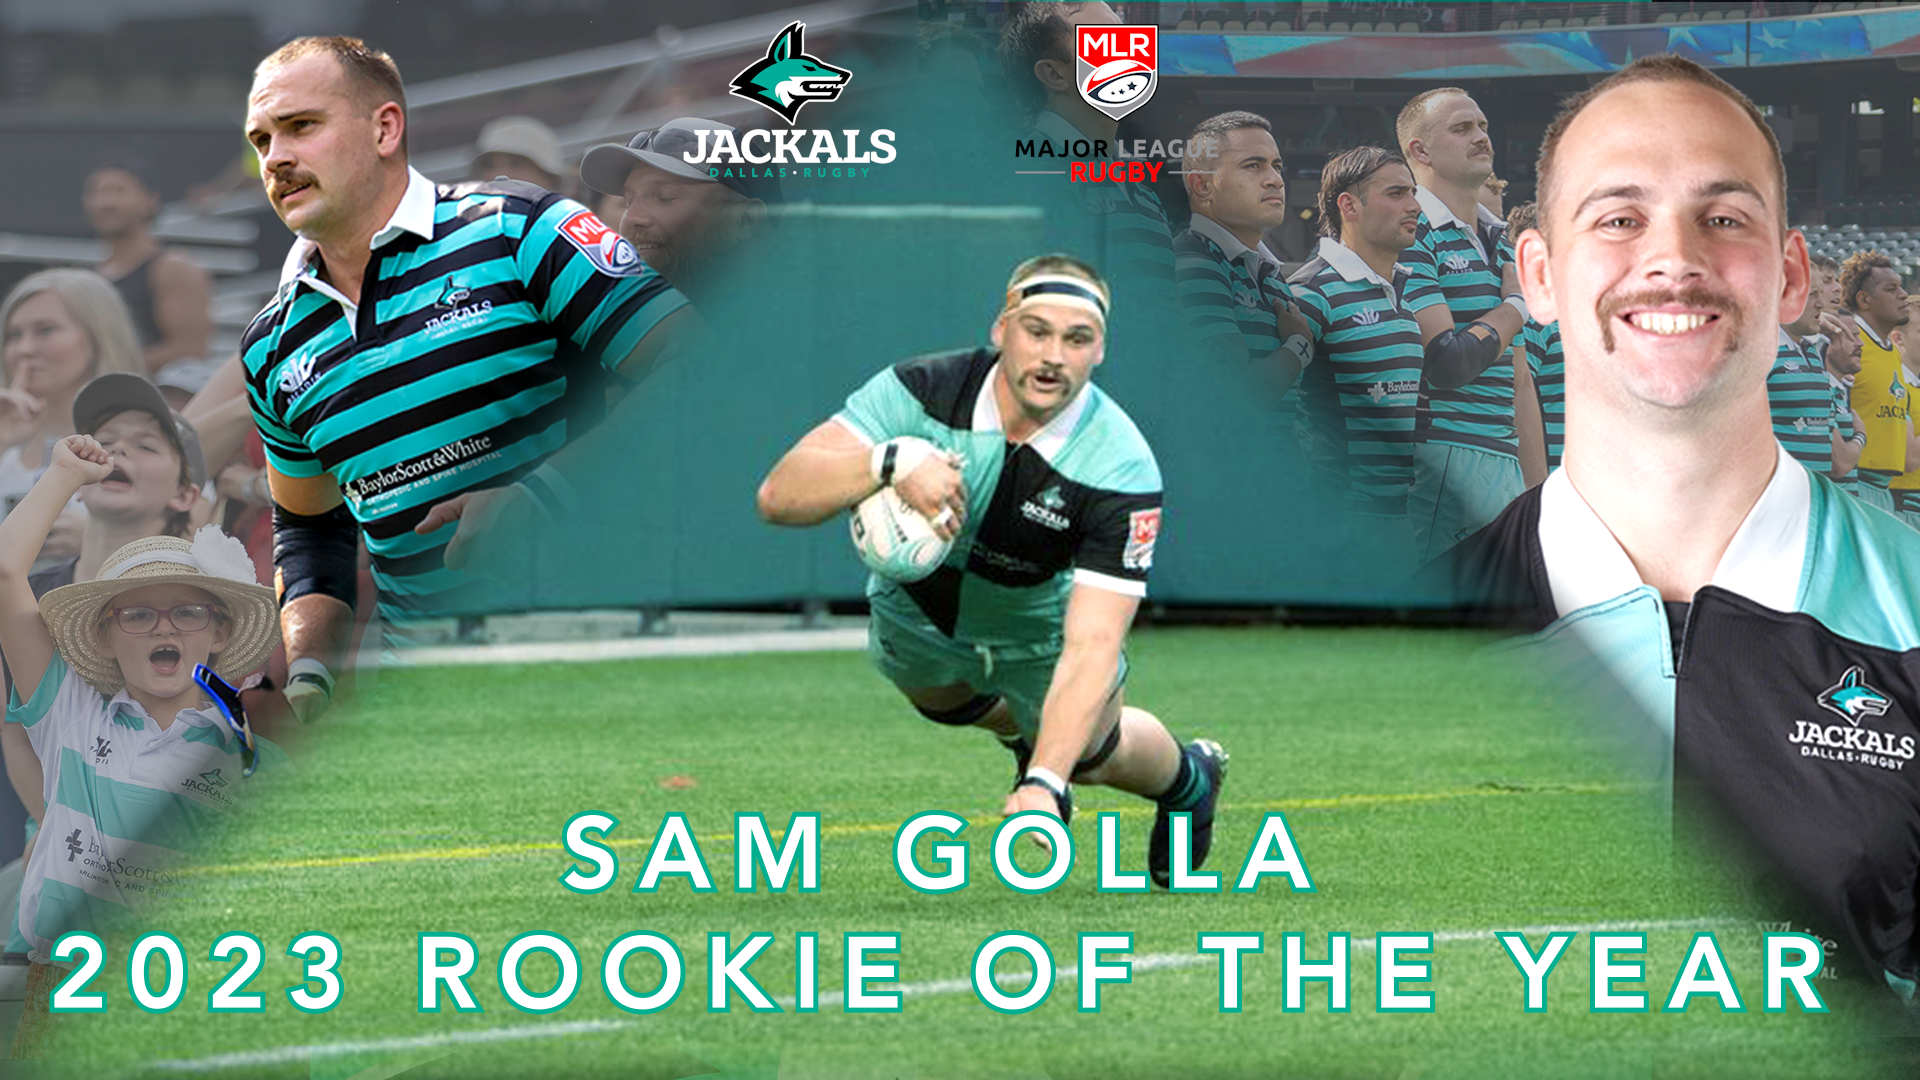 Sam Golla Named Rookie of the Year Presented by Sportsbreaks.com